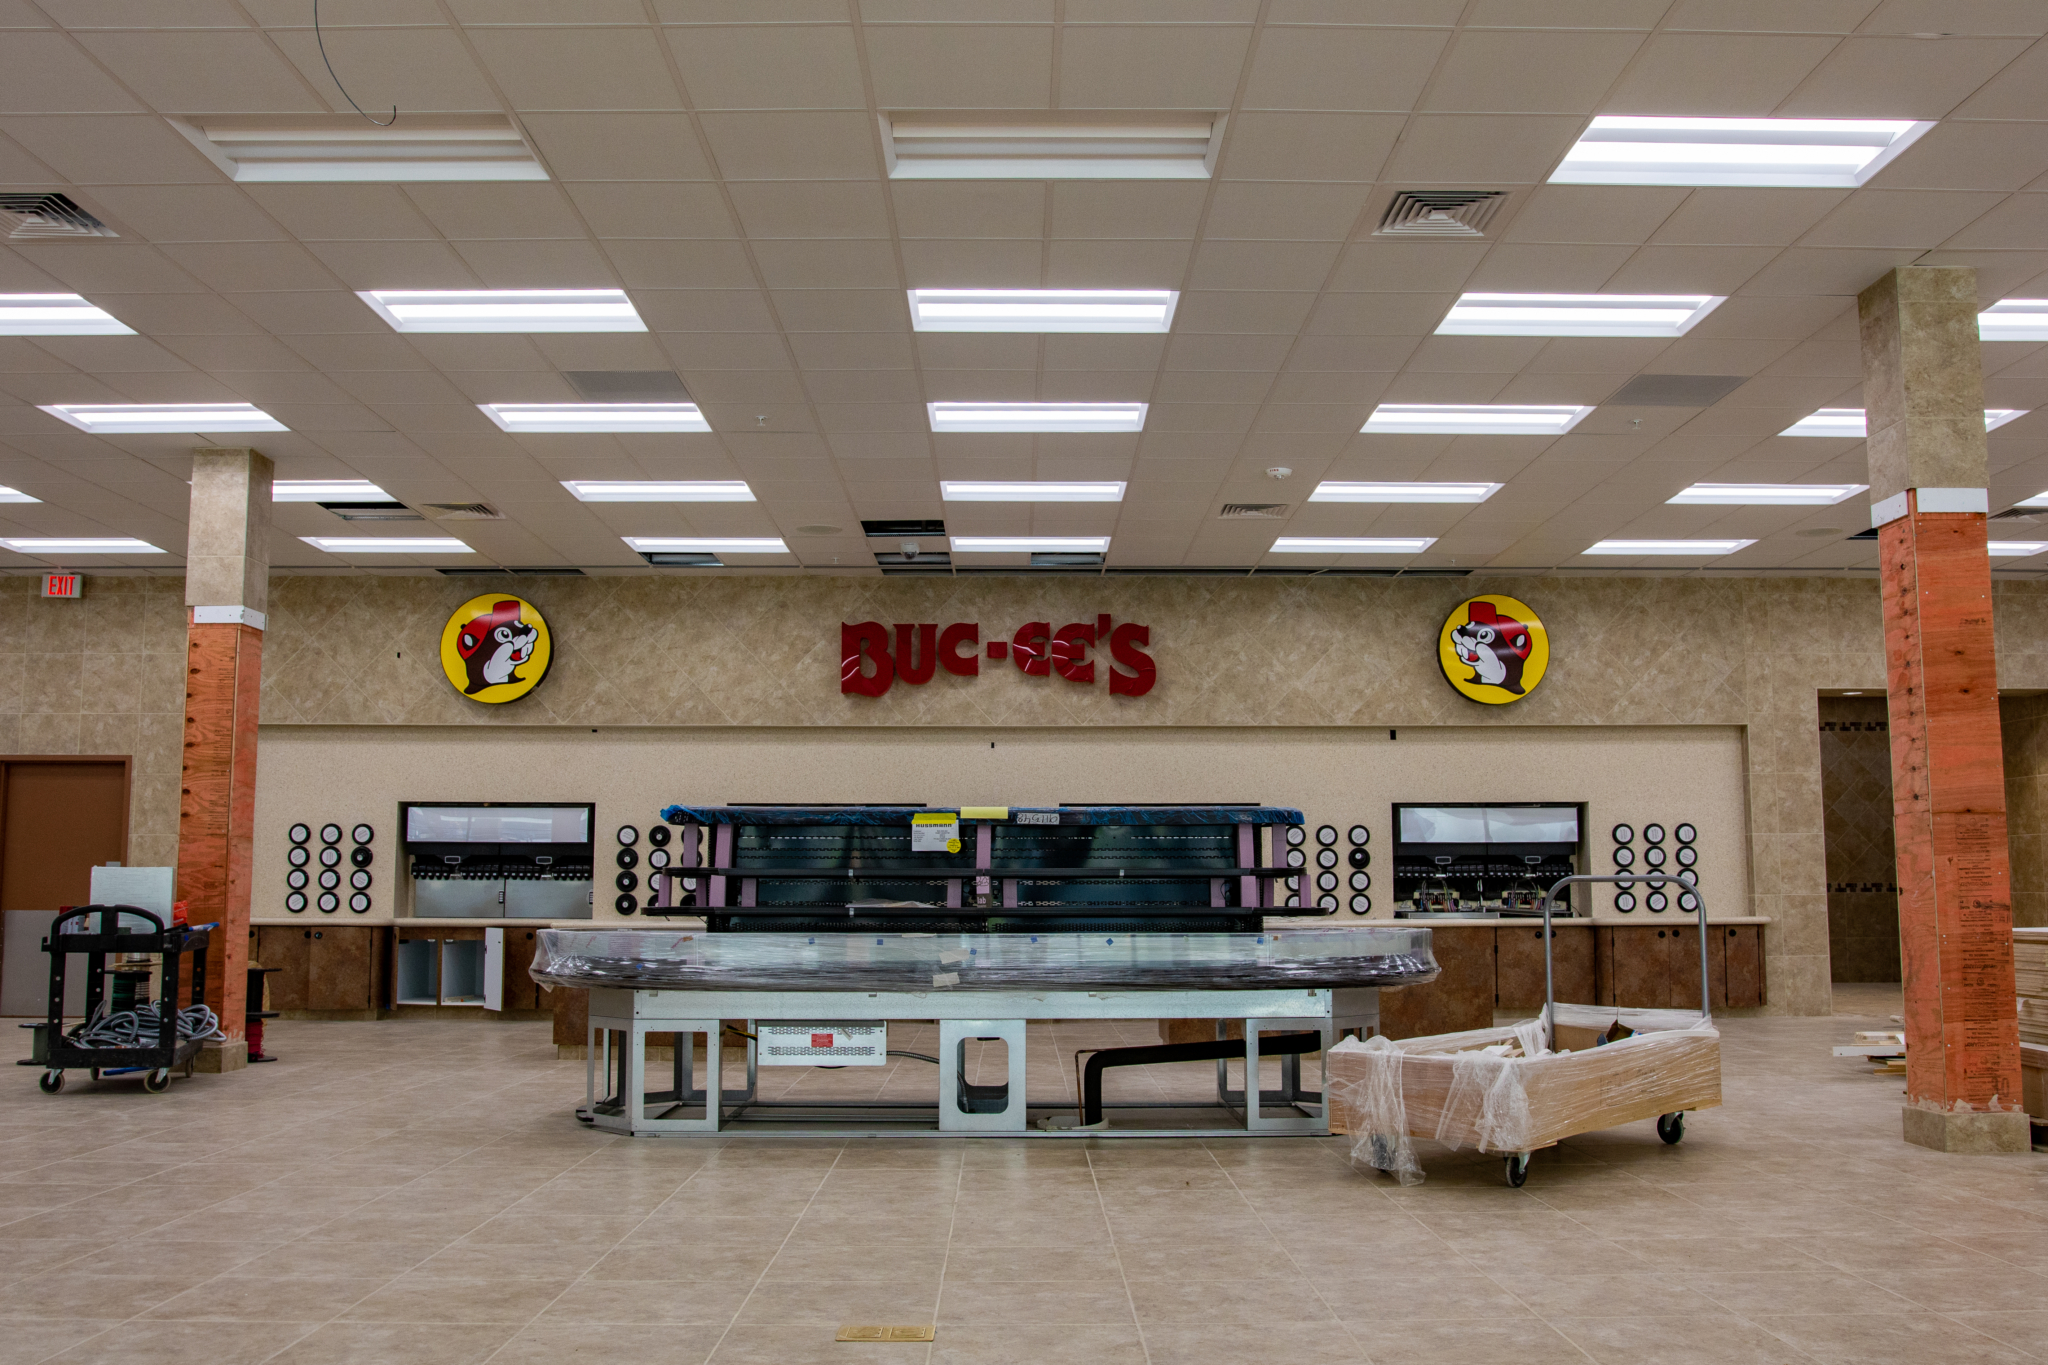 Bucees 24 We got an INSIDE look at the new Buc-EEs in Leeds. Check out the PHOTOS